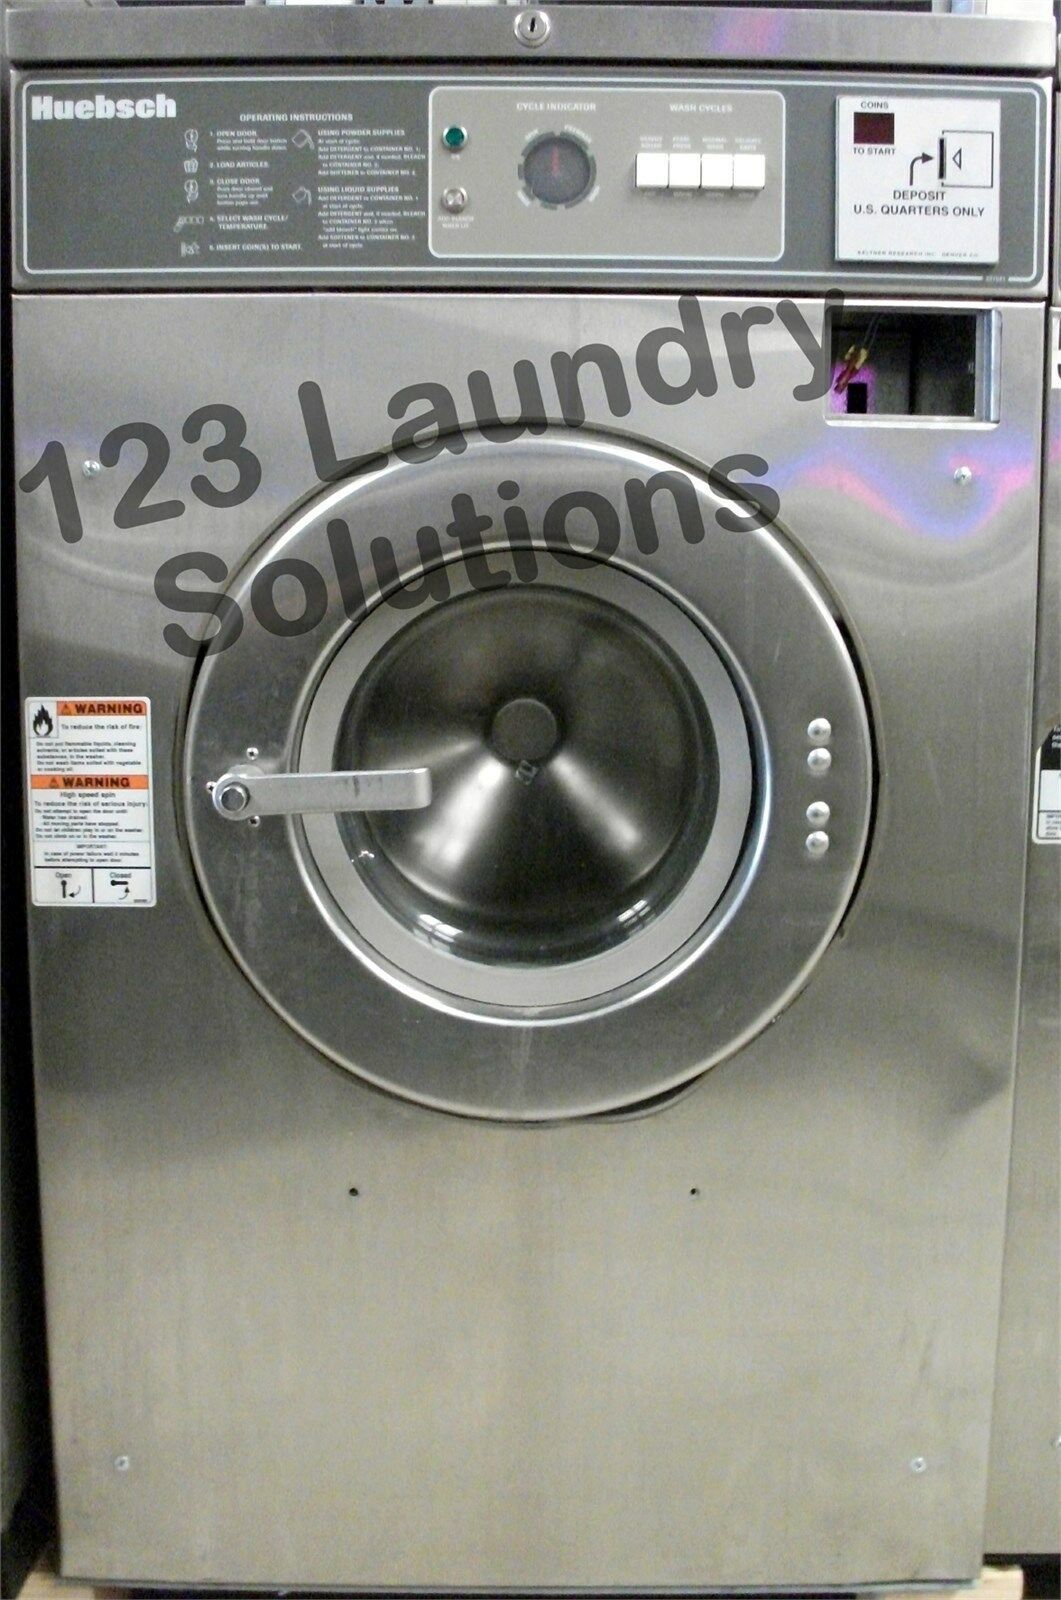 Huebsch 27 lbs, Front Load Washer, 208-240v, Stainless Steel, HC27MD2OU40001 - $1,781.99